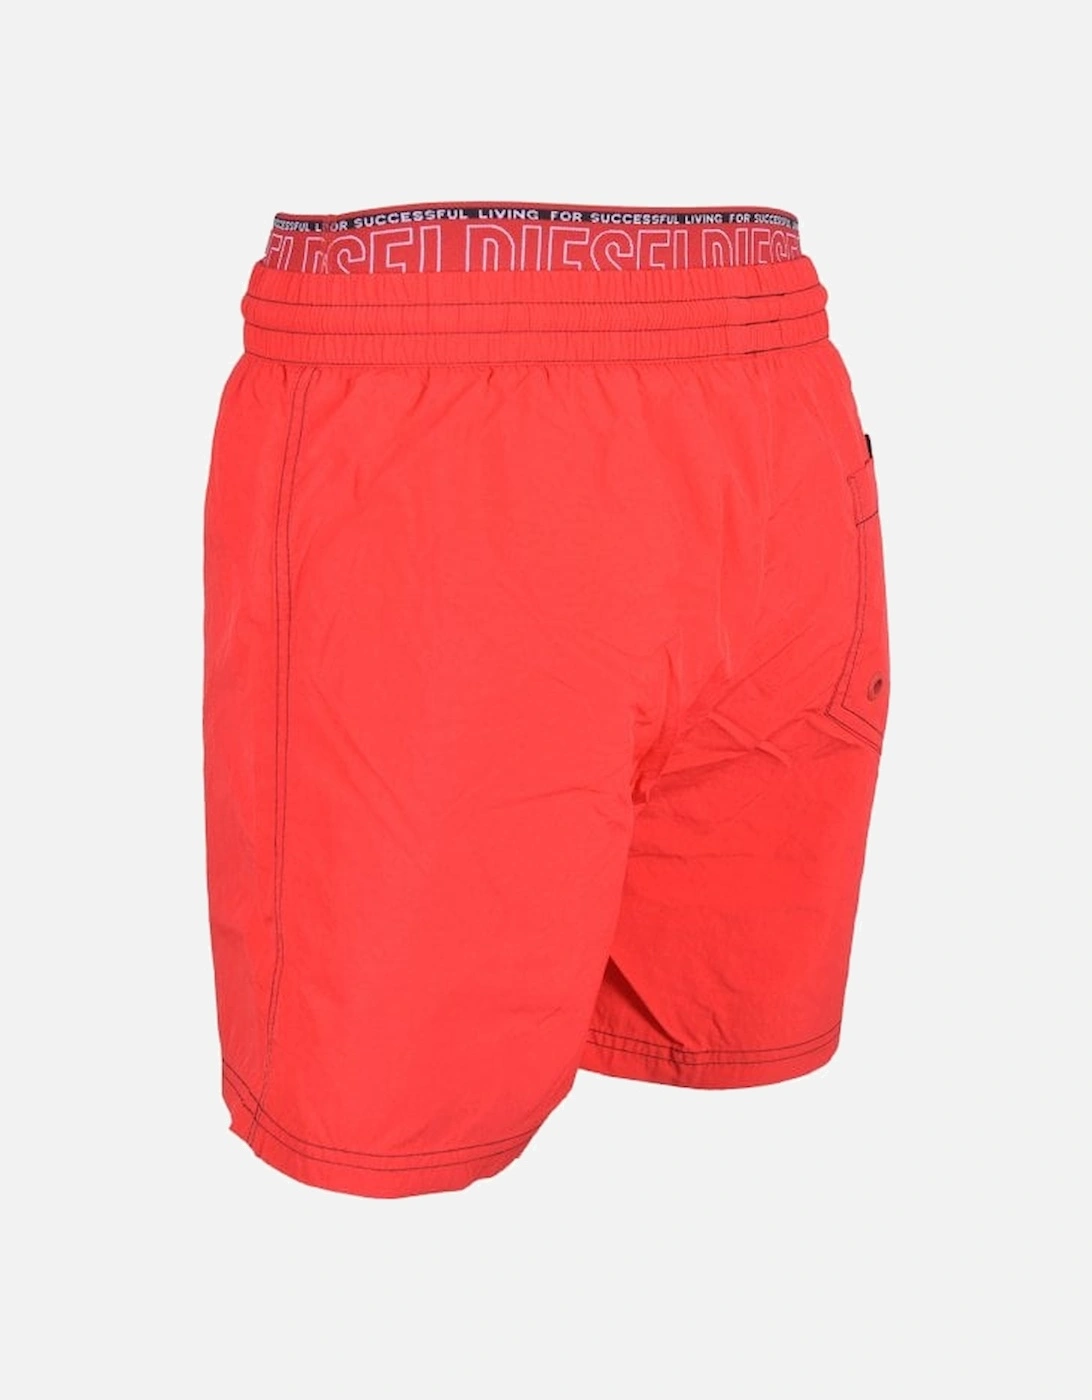 "For Successful Living" Double Waistband Swim Shorts, Red